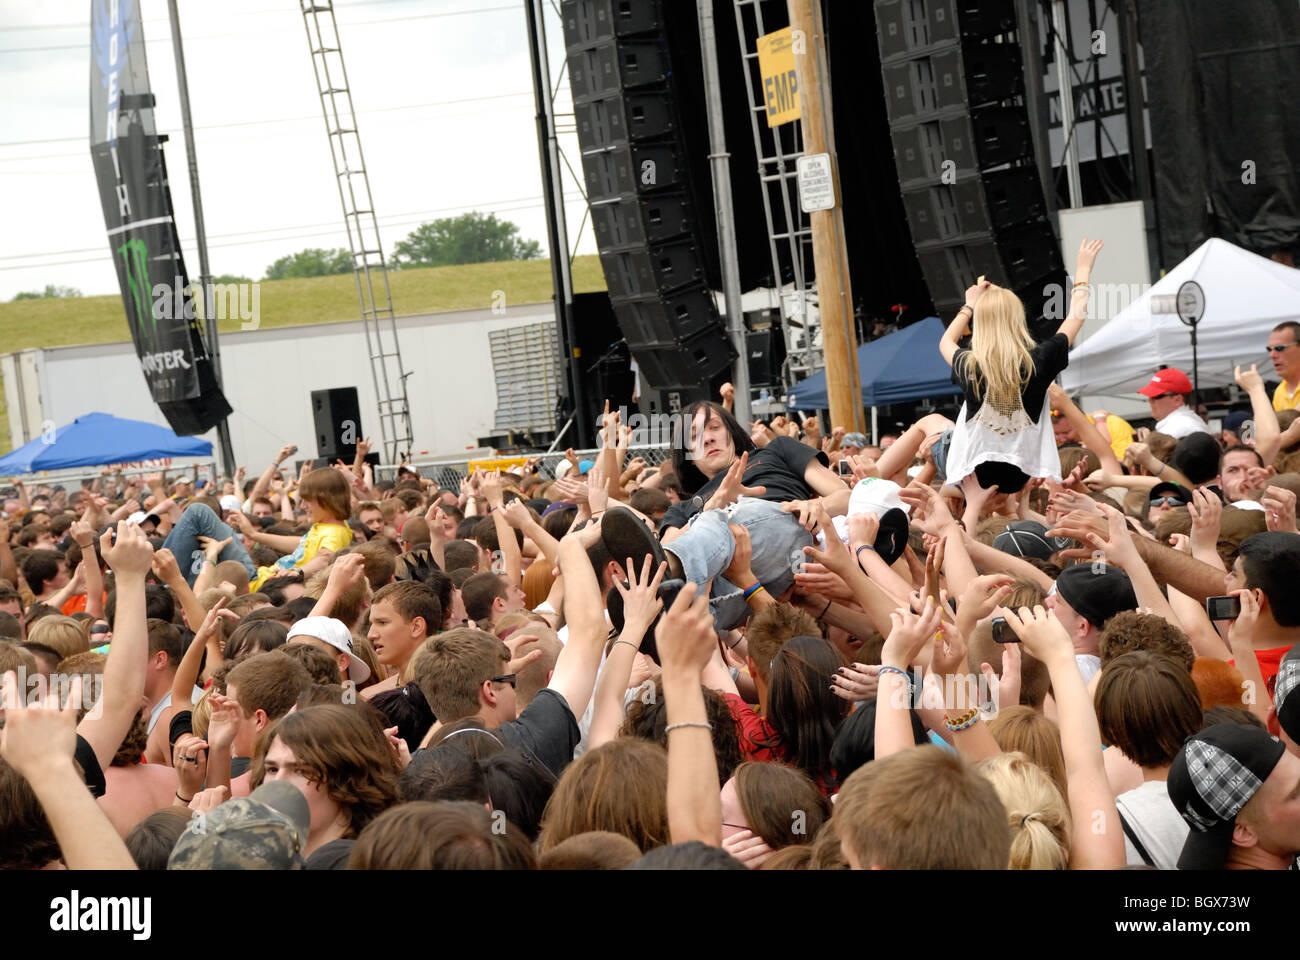 Crowd at an outdoor festival rock concert, where people are being crowd-surfed. Stock Photo